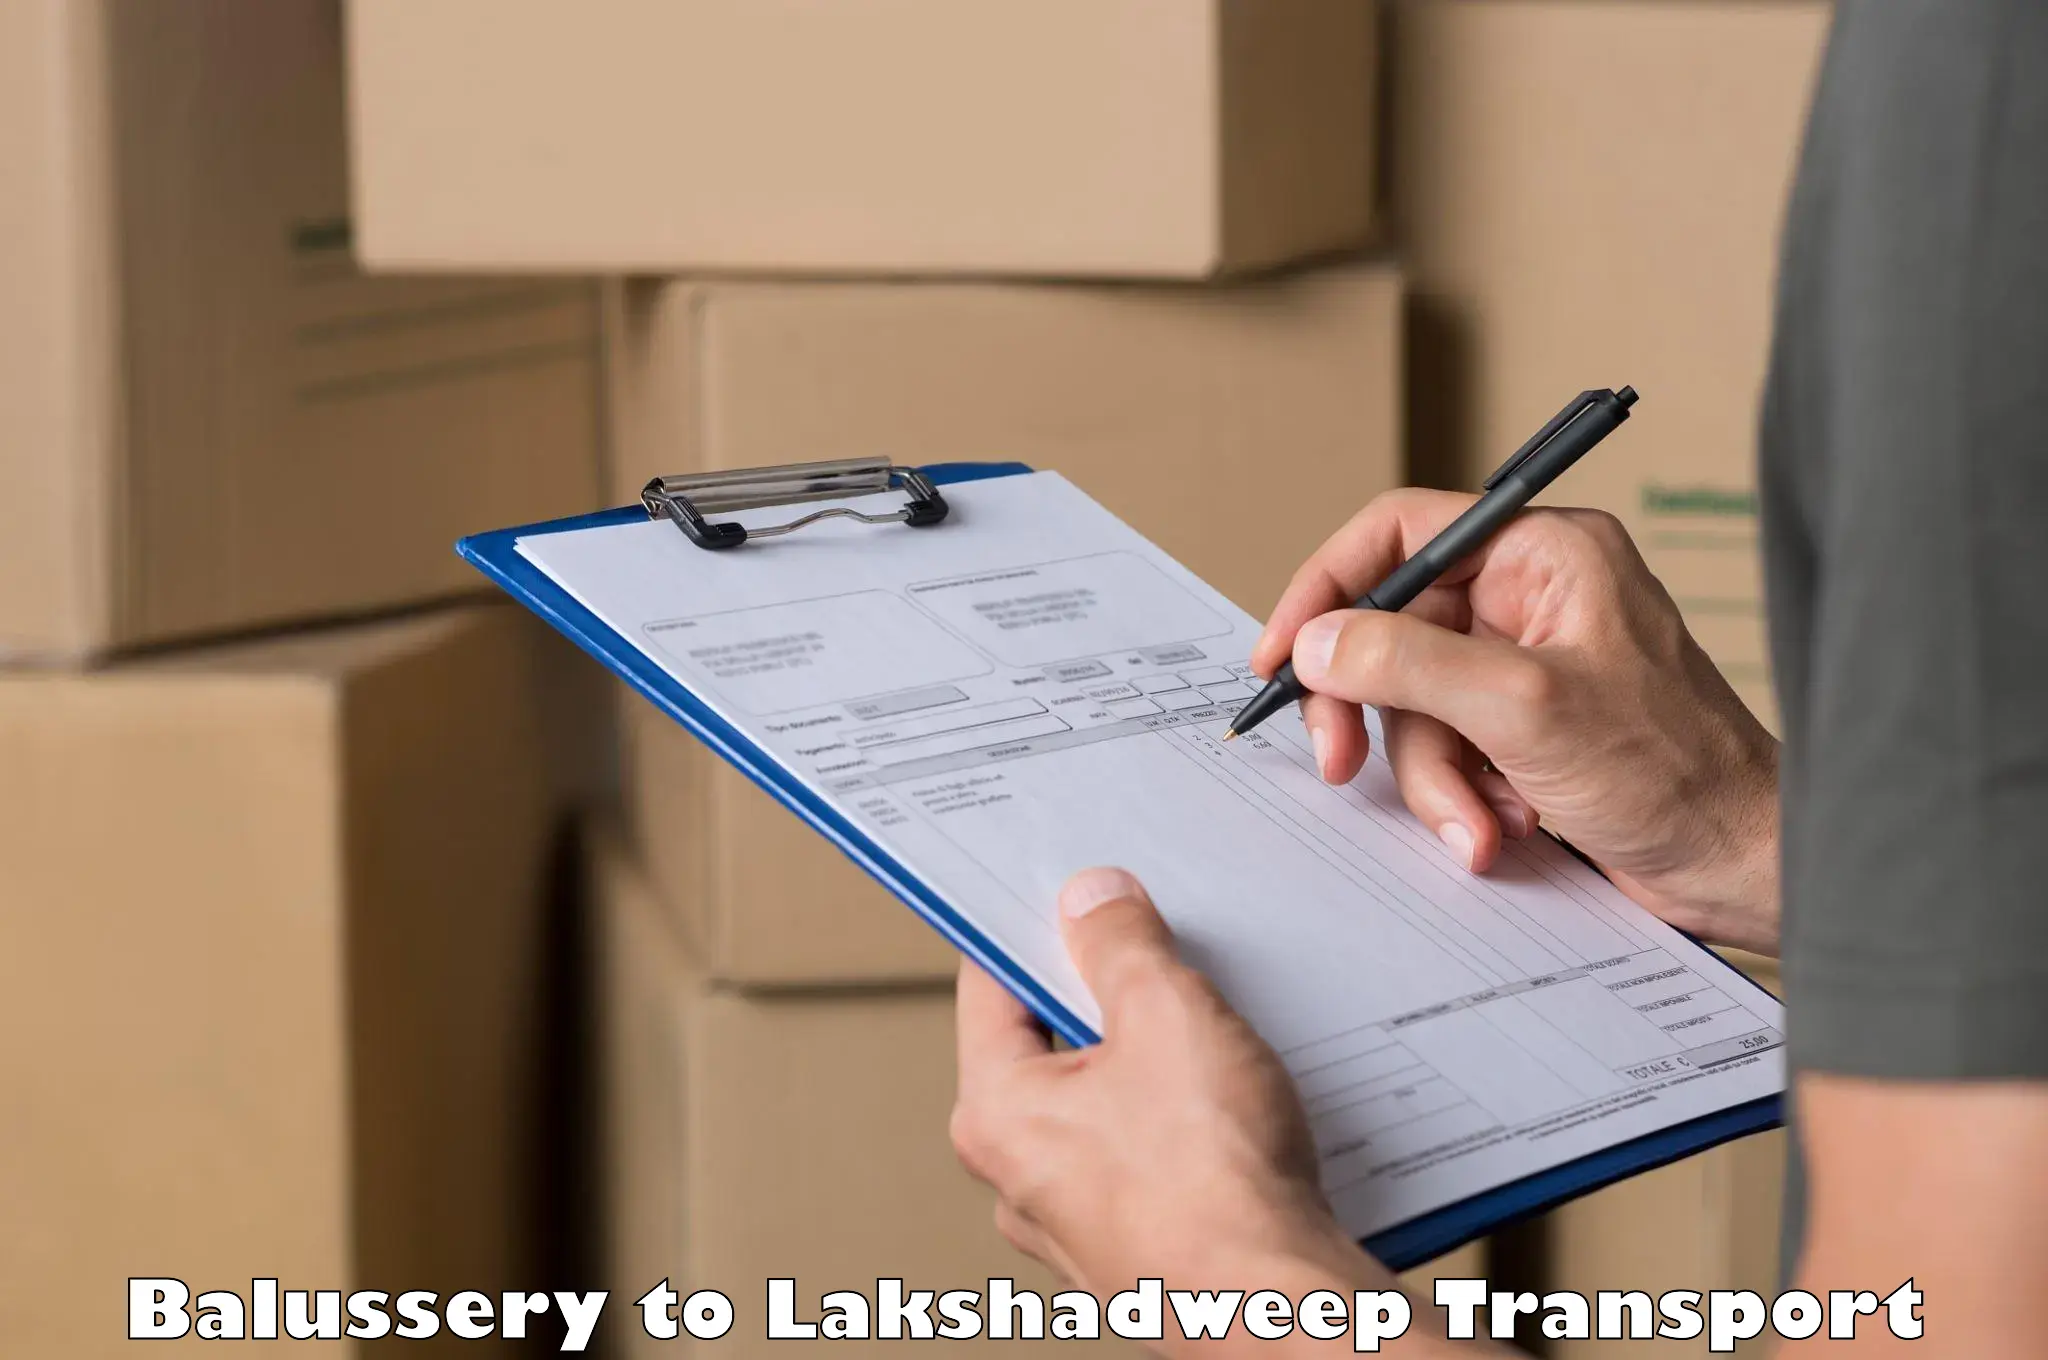 Two wheeler transport services Balussery to Lakshadweep